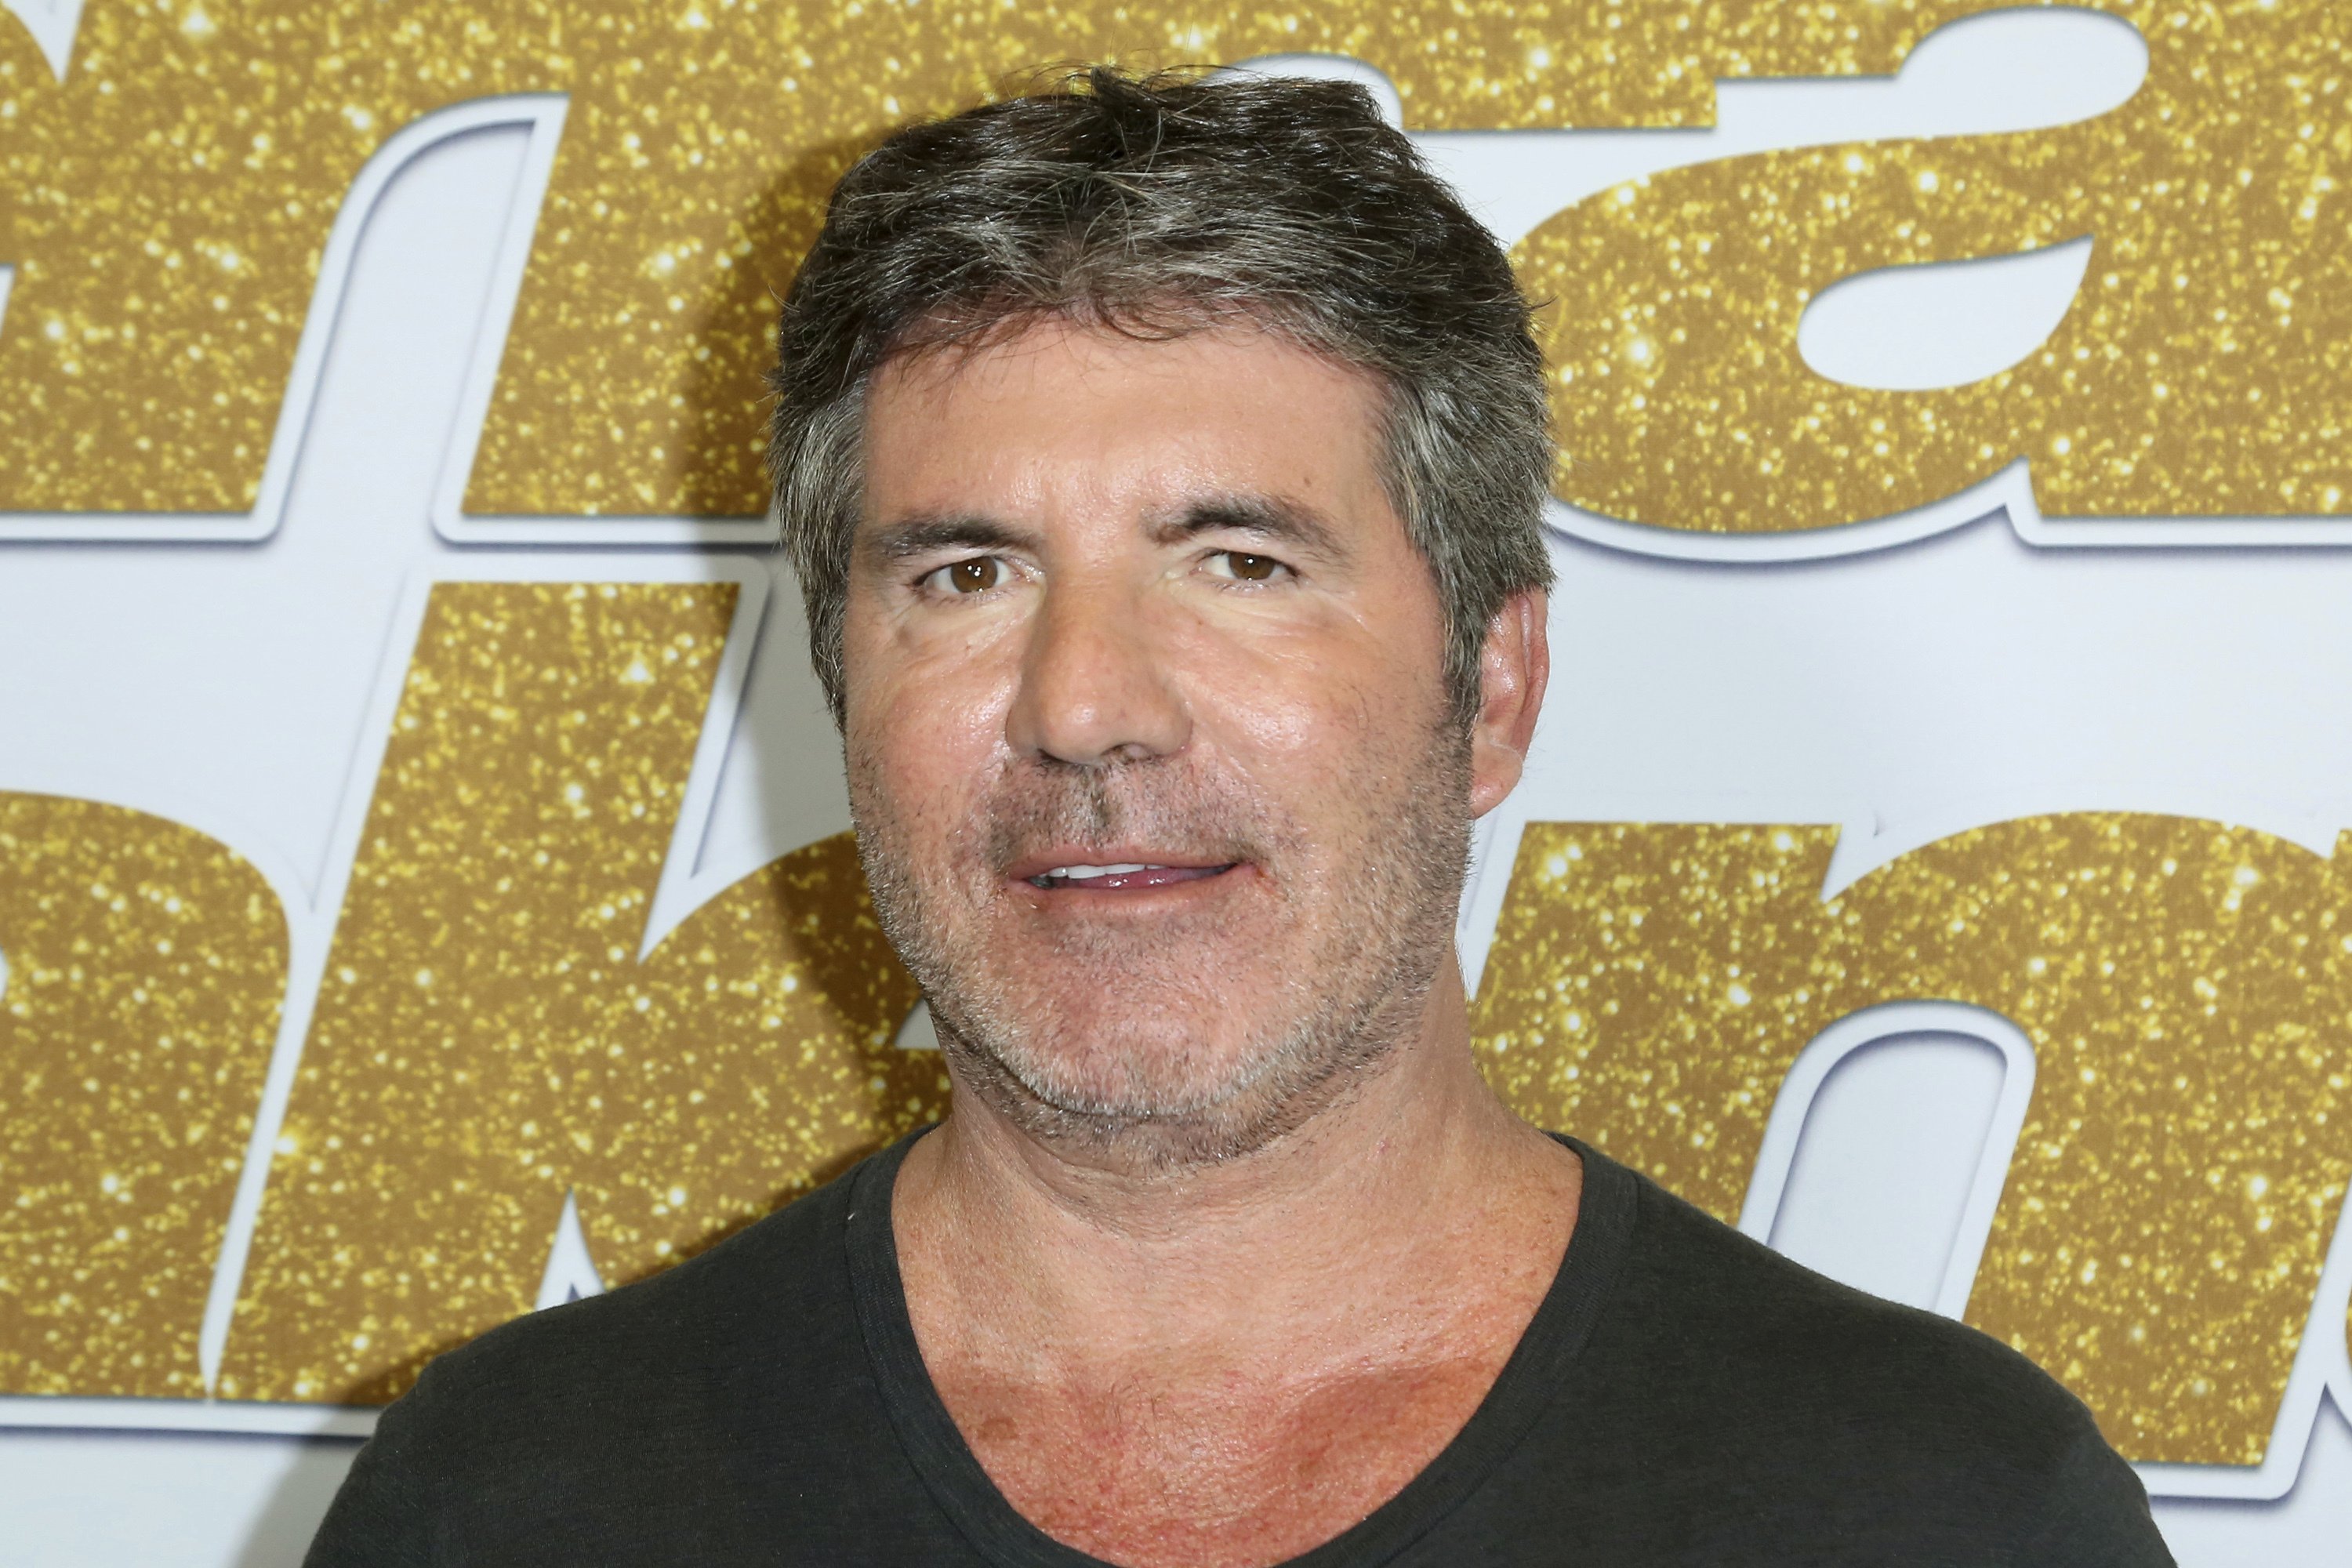 Simon Cowell injures back while testing electric bicycle thumbnail